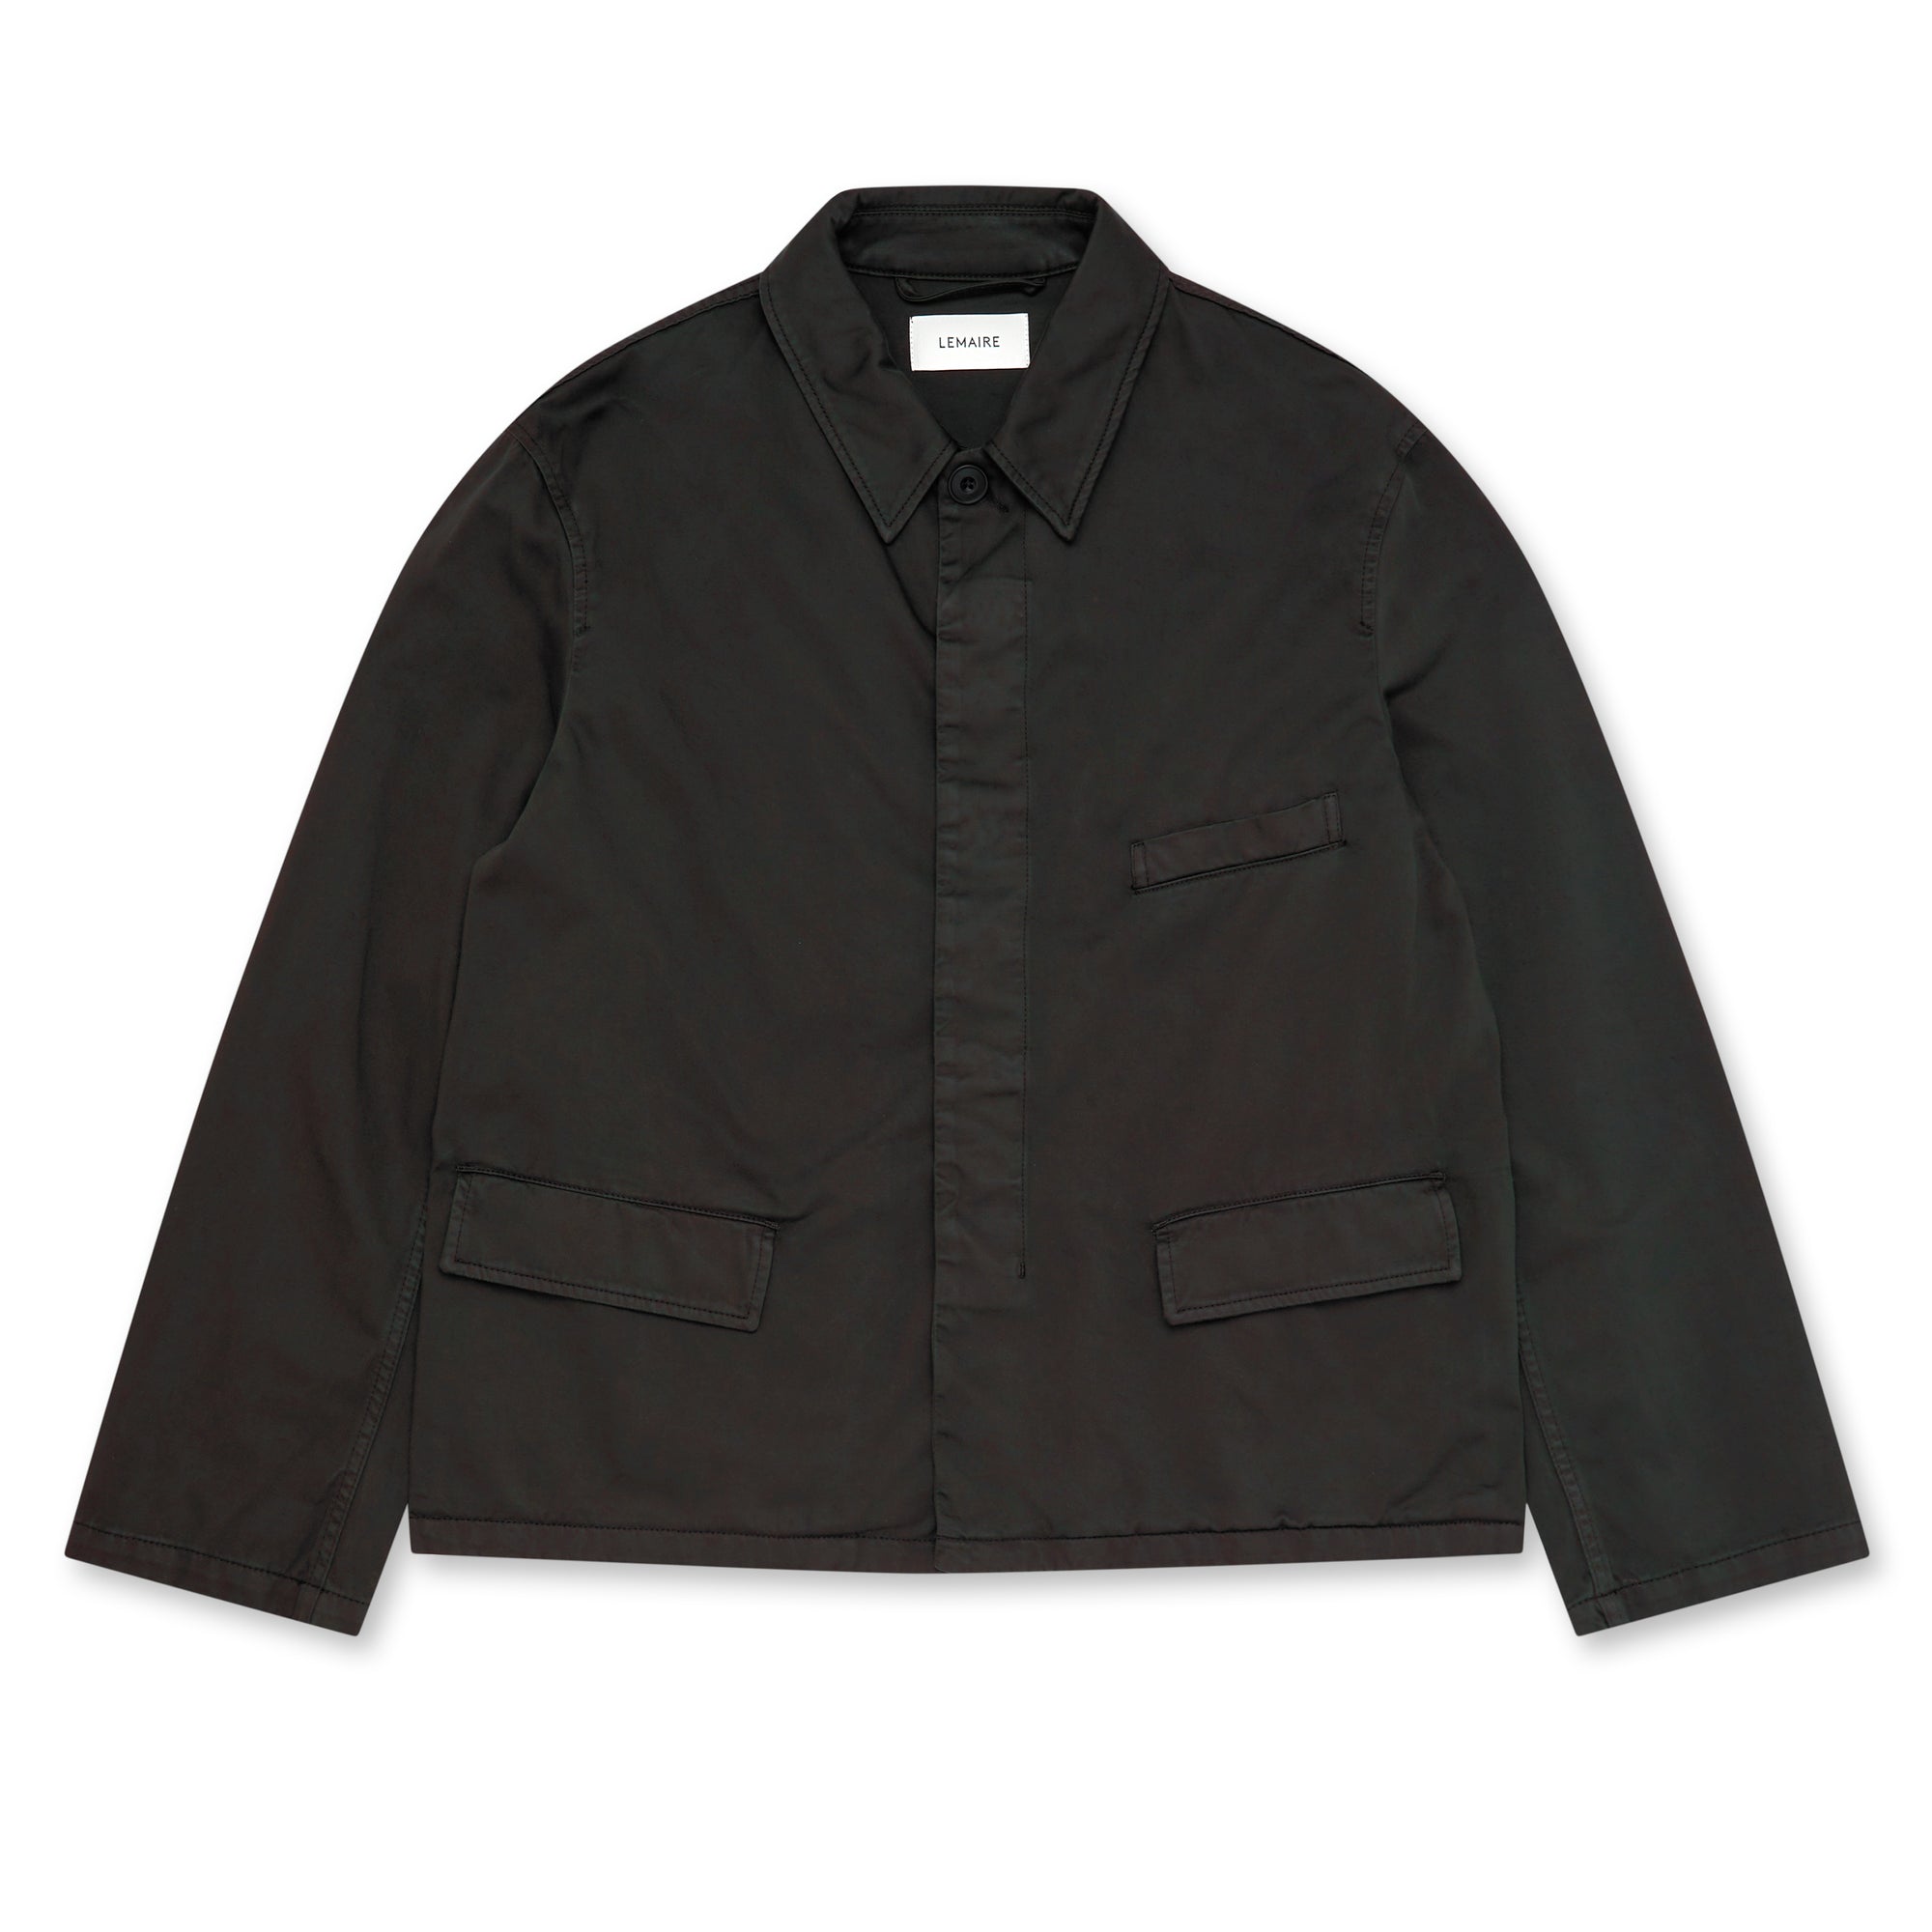 Lemaire - Men’s Workwear Jacket - (Green) view 5